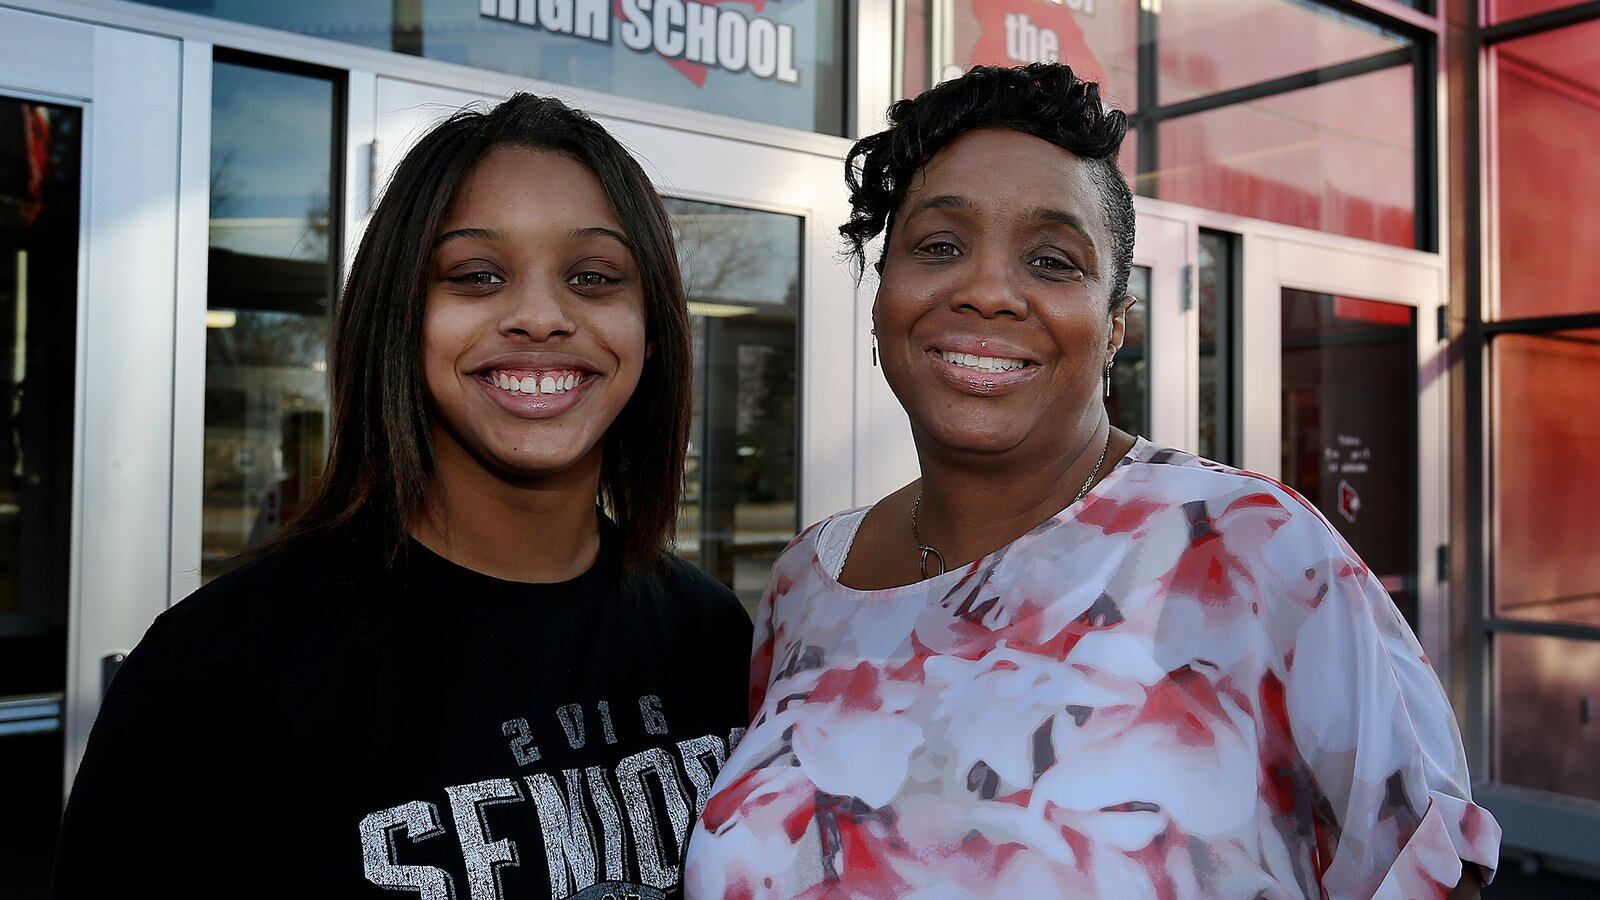 LaTonya Kirkland, right, and her daughter LaShawn have been directly affected by Indianapolis' decades-long effort to desegregate the city's schools. LaTonya was part of the first class of students to be bused to Perry Township from IPS back in the 1980s, and LaShawn was in the last class. She graduated this spring from Southport High School.